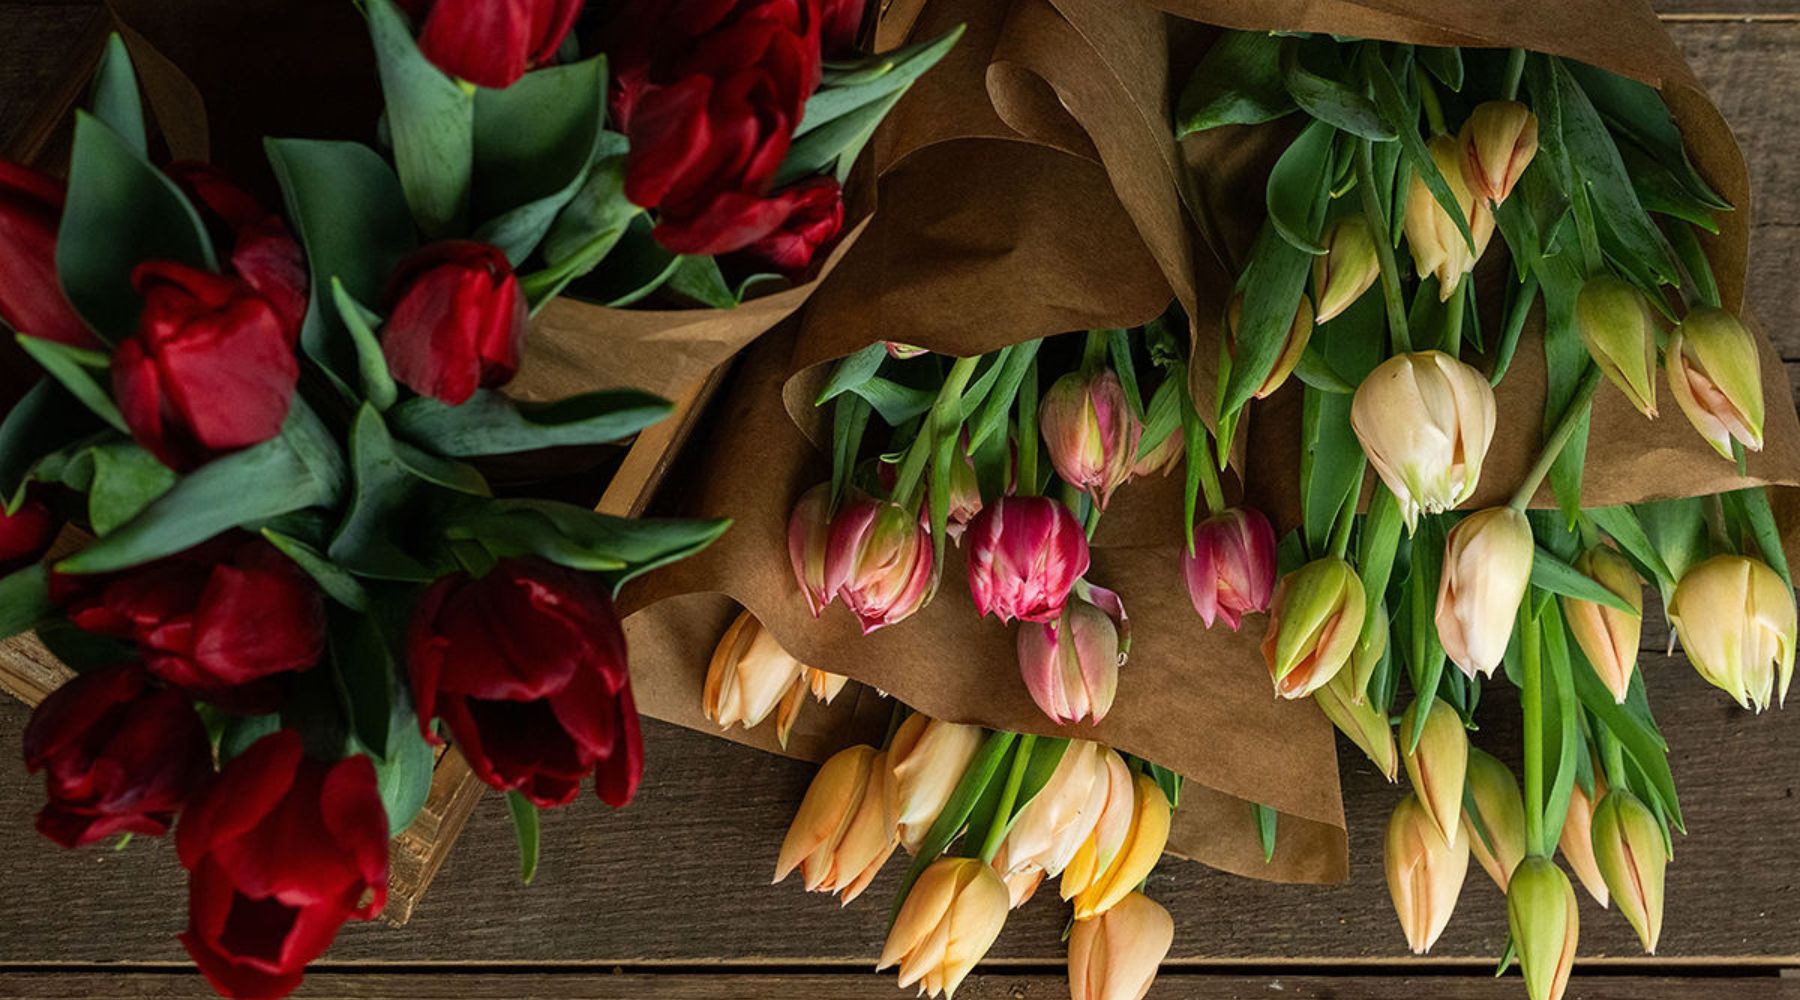 Tulip harvested and arranged into bouquets and wrapped in kraft paper